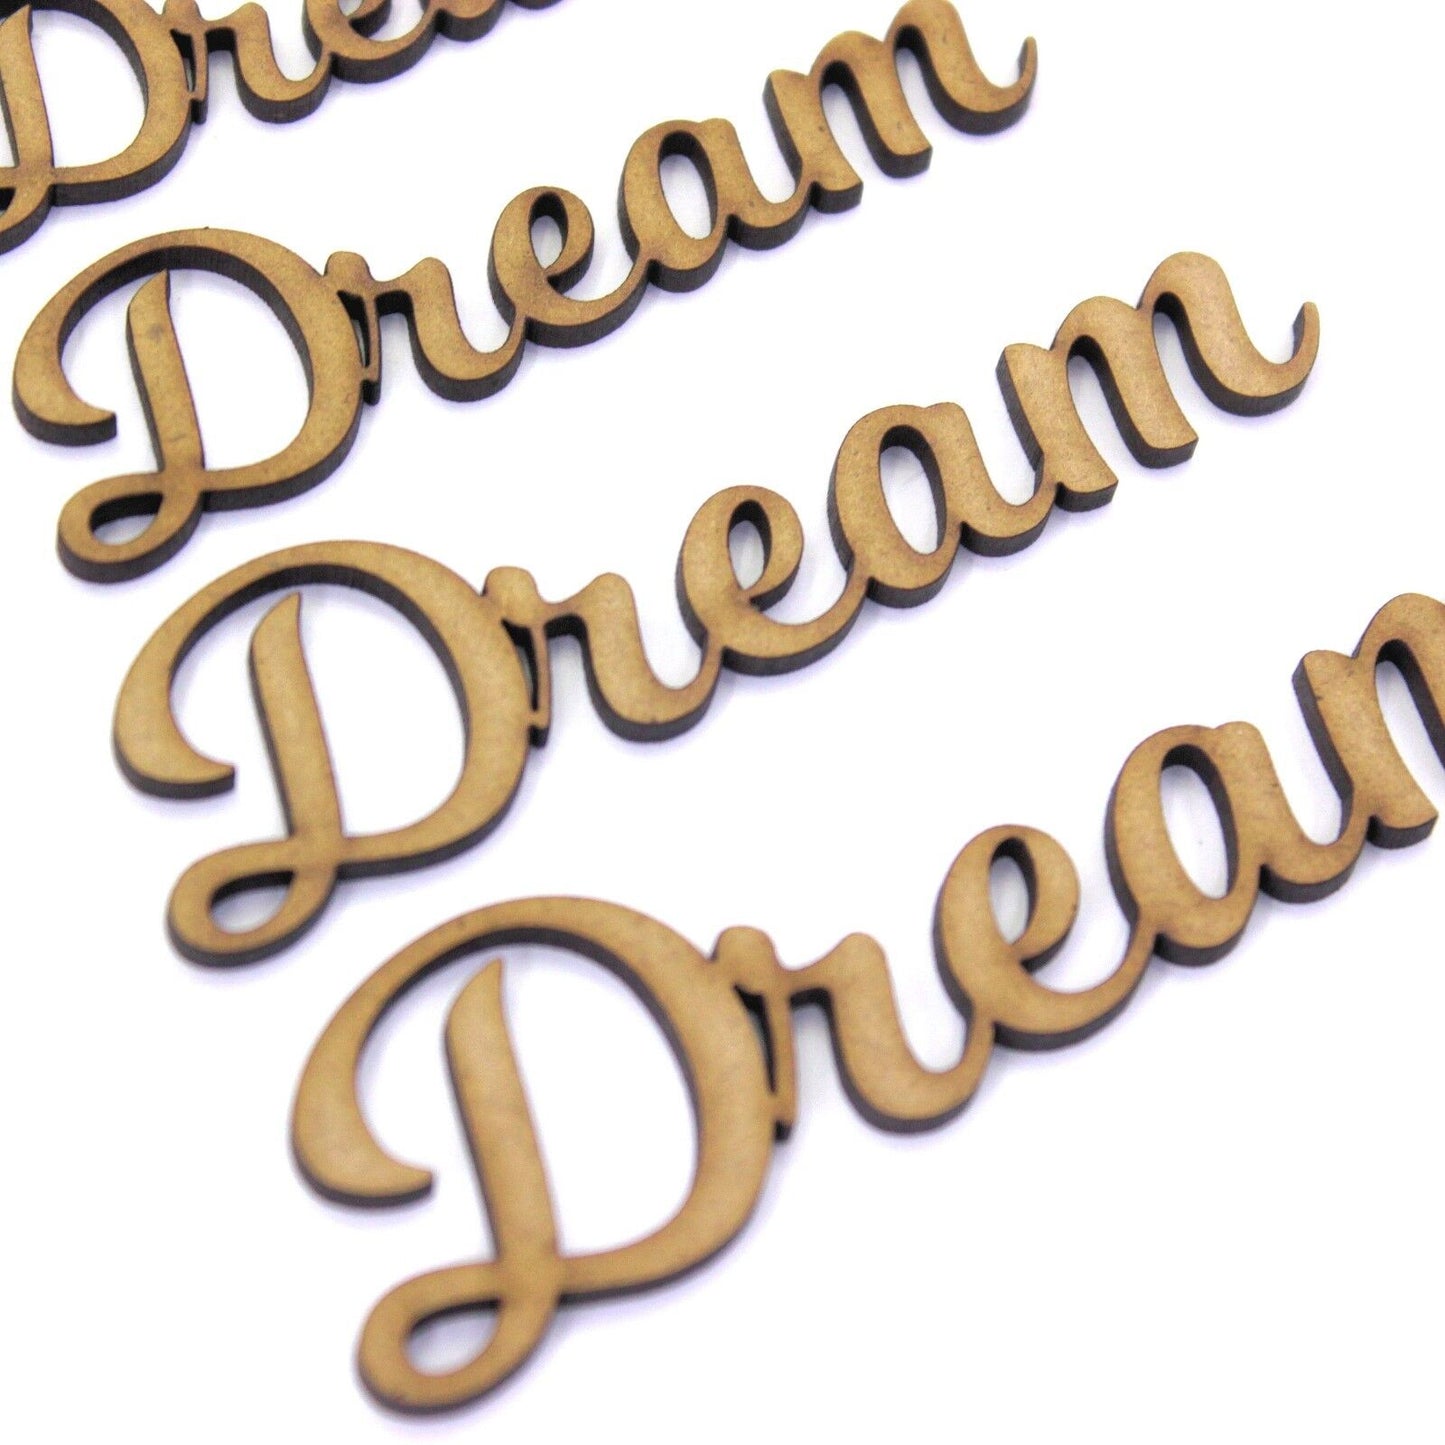 Dream Word Craft Shape, Various Sizes, 2mm MDF Wood. Joined up lettering, script